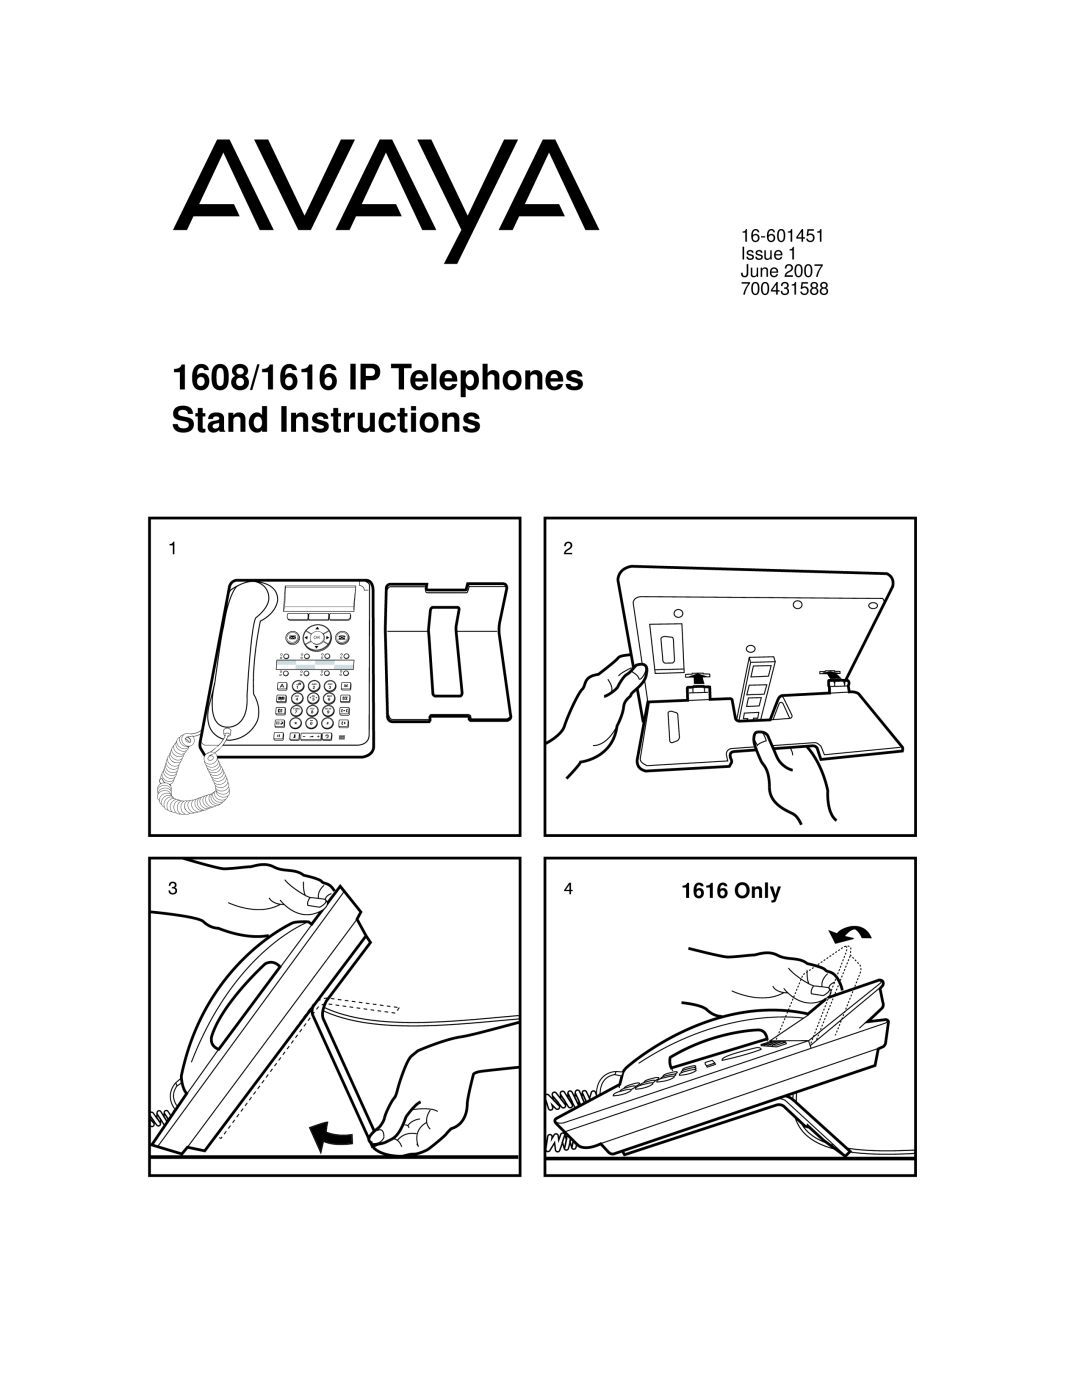 Avaya manual 1608/1616 IP Telephones Stand Instructions, Only, Issue 1 June, Wxyz, Pqrs 